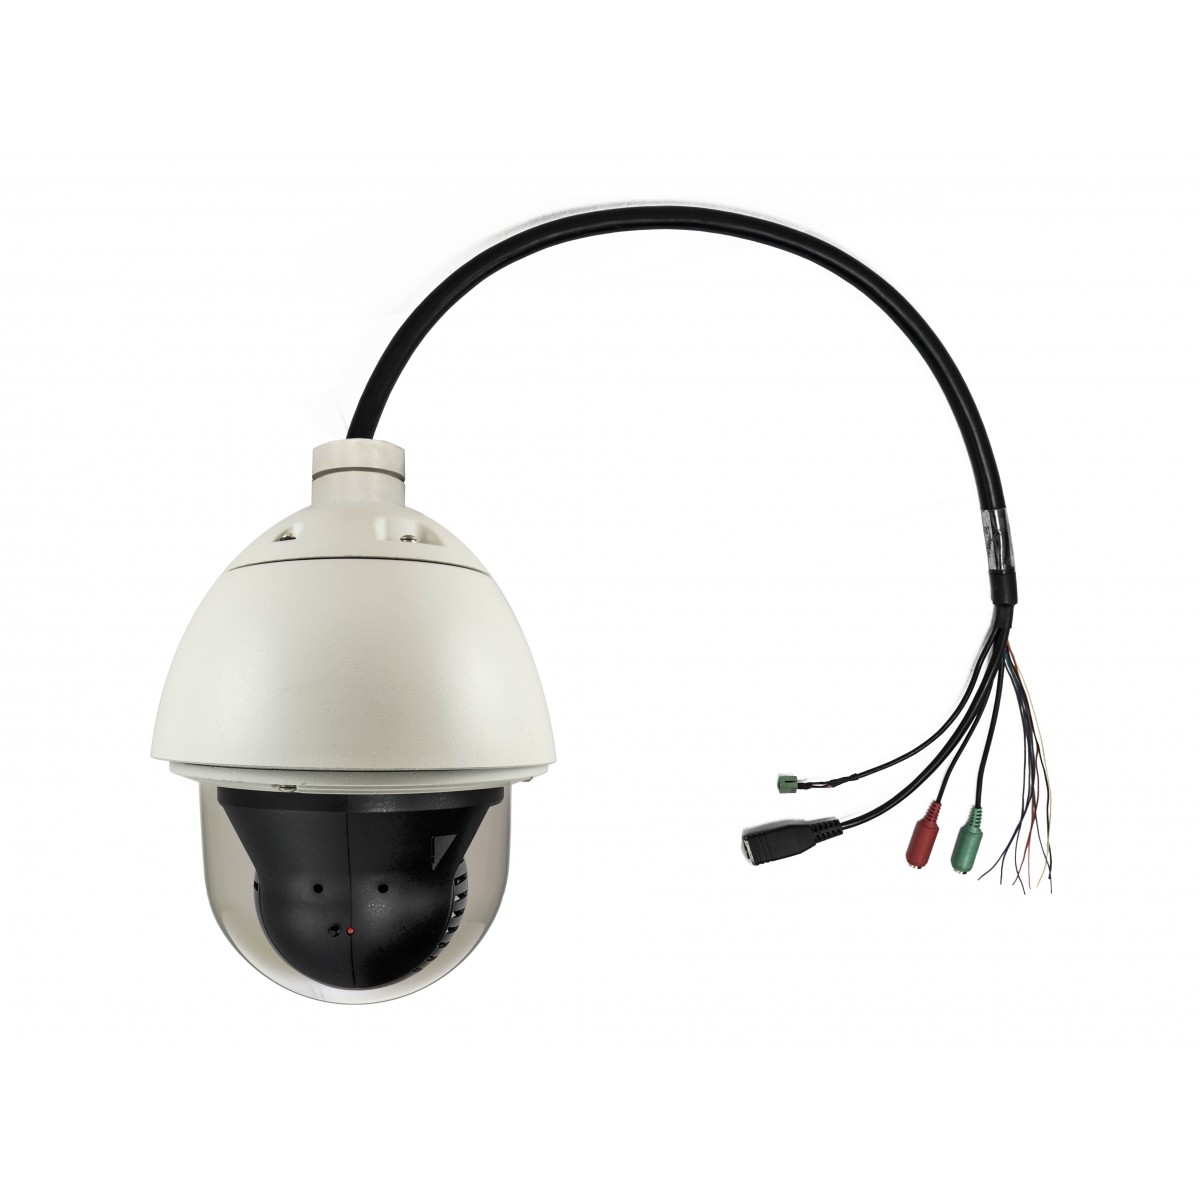 LevelOne HUBBLE PTZ Dome IP Network Camera - 2-Megapixel - 30X Optical Zoom - Indoor/Outdoor - two-way audio - 802.3at PoE - IP 